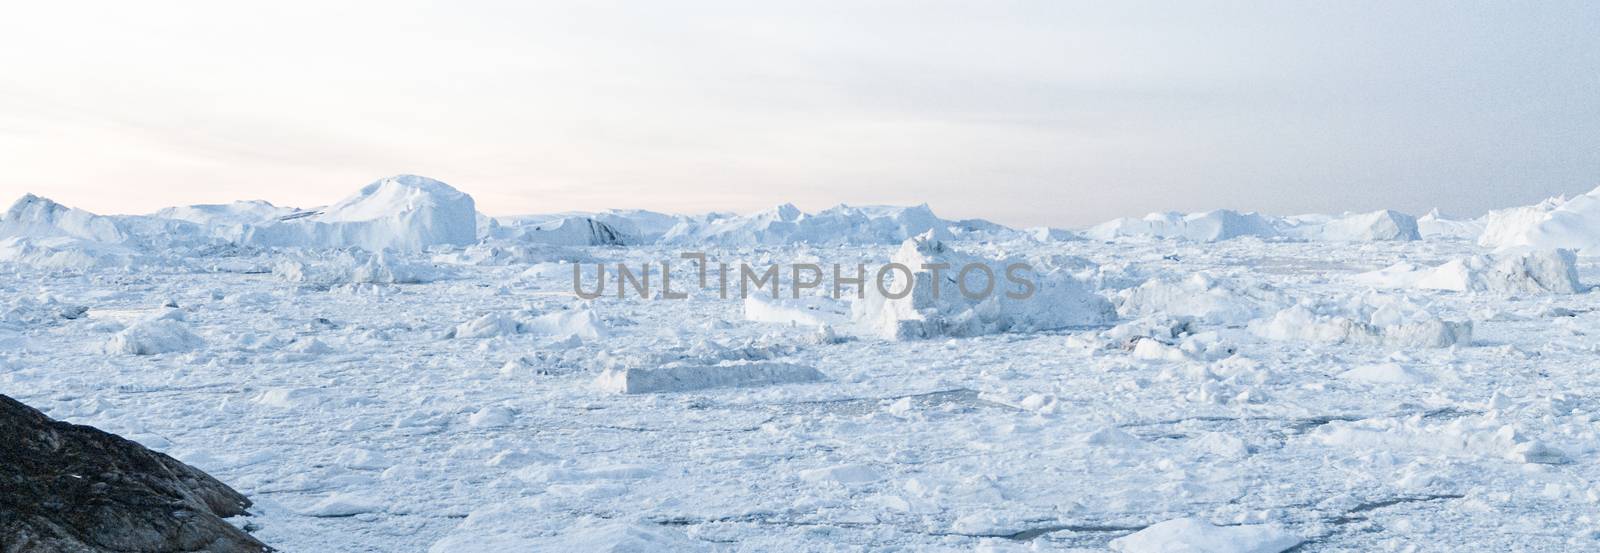 Climate Change Concept. Greenland landscape nature with icebergs and ice in Greenland icefjord. Aerial drone panoramic banner photo of Ilulissat Icefjord with icebergs from Jakobshavn Glacier by Maridav